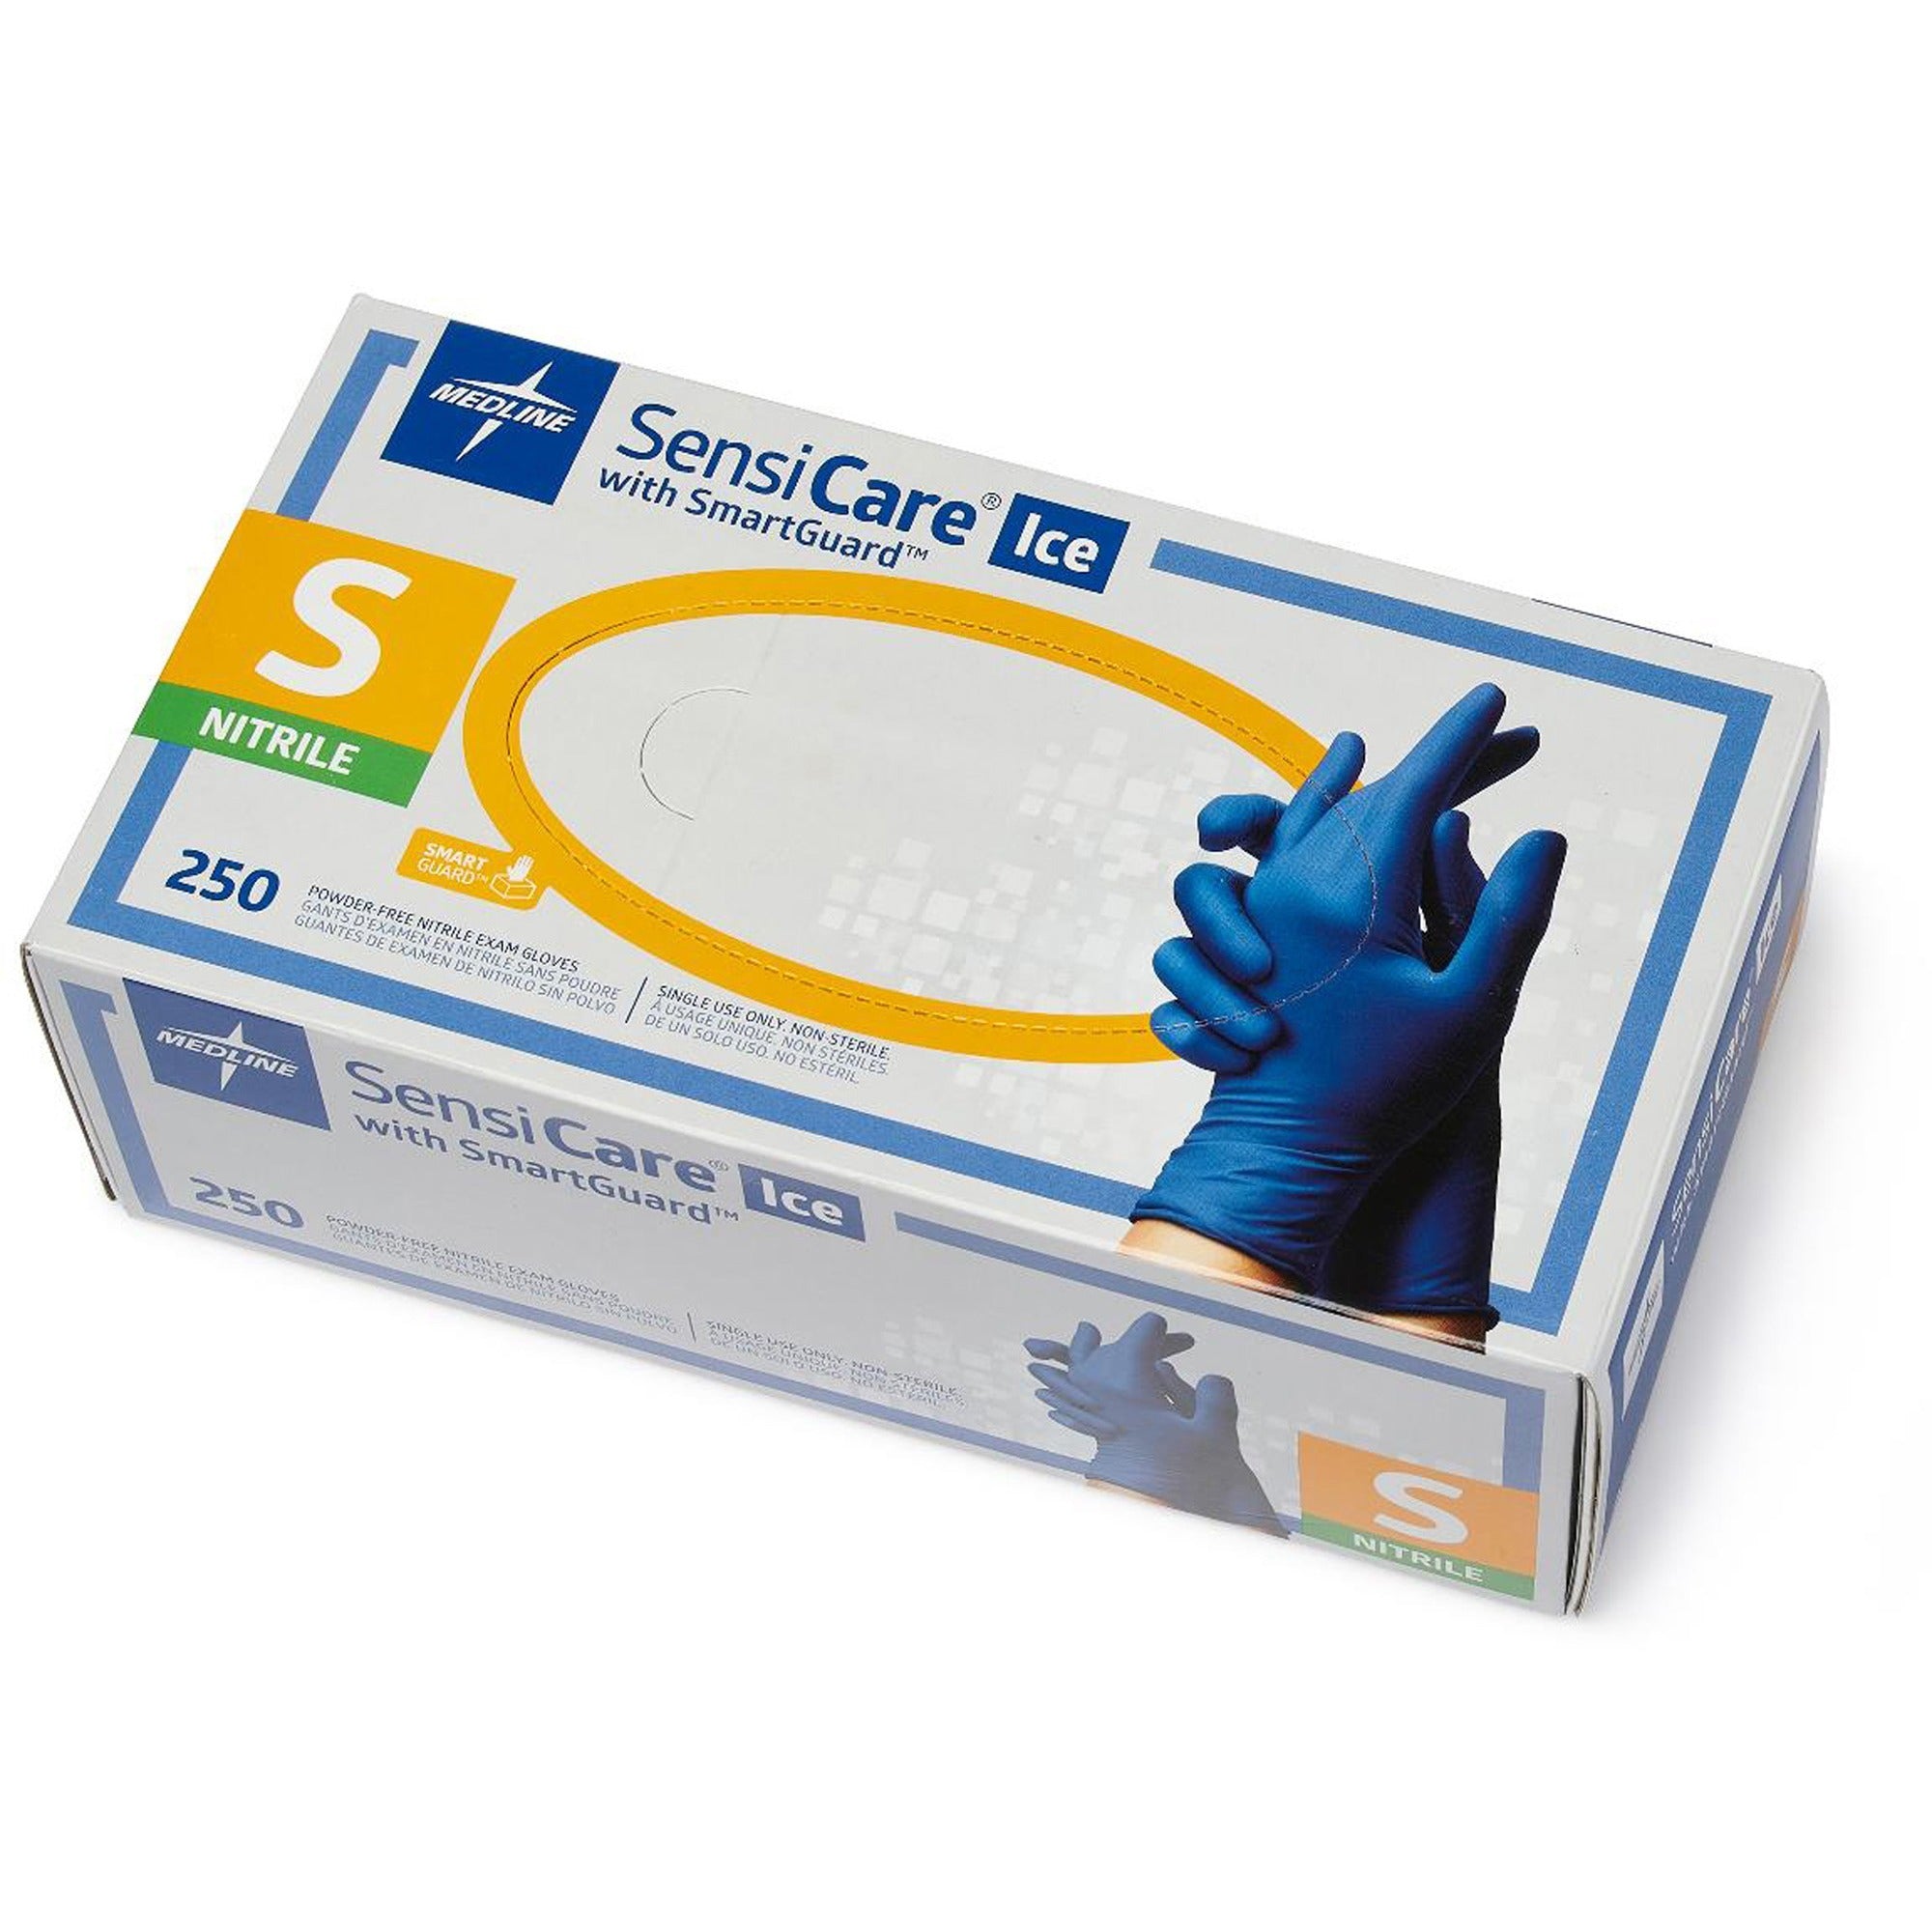 medline-sensicare-ice-blue-nitrile-exam-gloves-small-size-dark-blue-comfortable-chemical-resistant-latex-free-textured-fingertip-non-sterile-durable-for-medical-250-box-950-glove-length_miimds6801 - 1